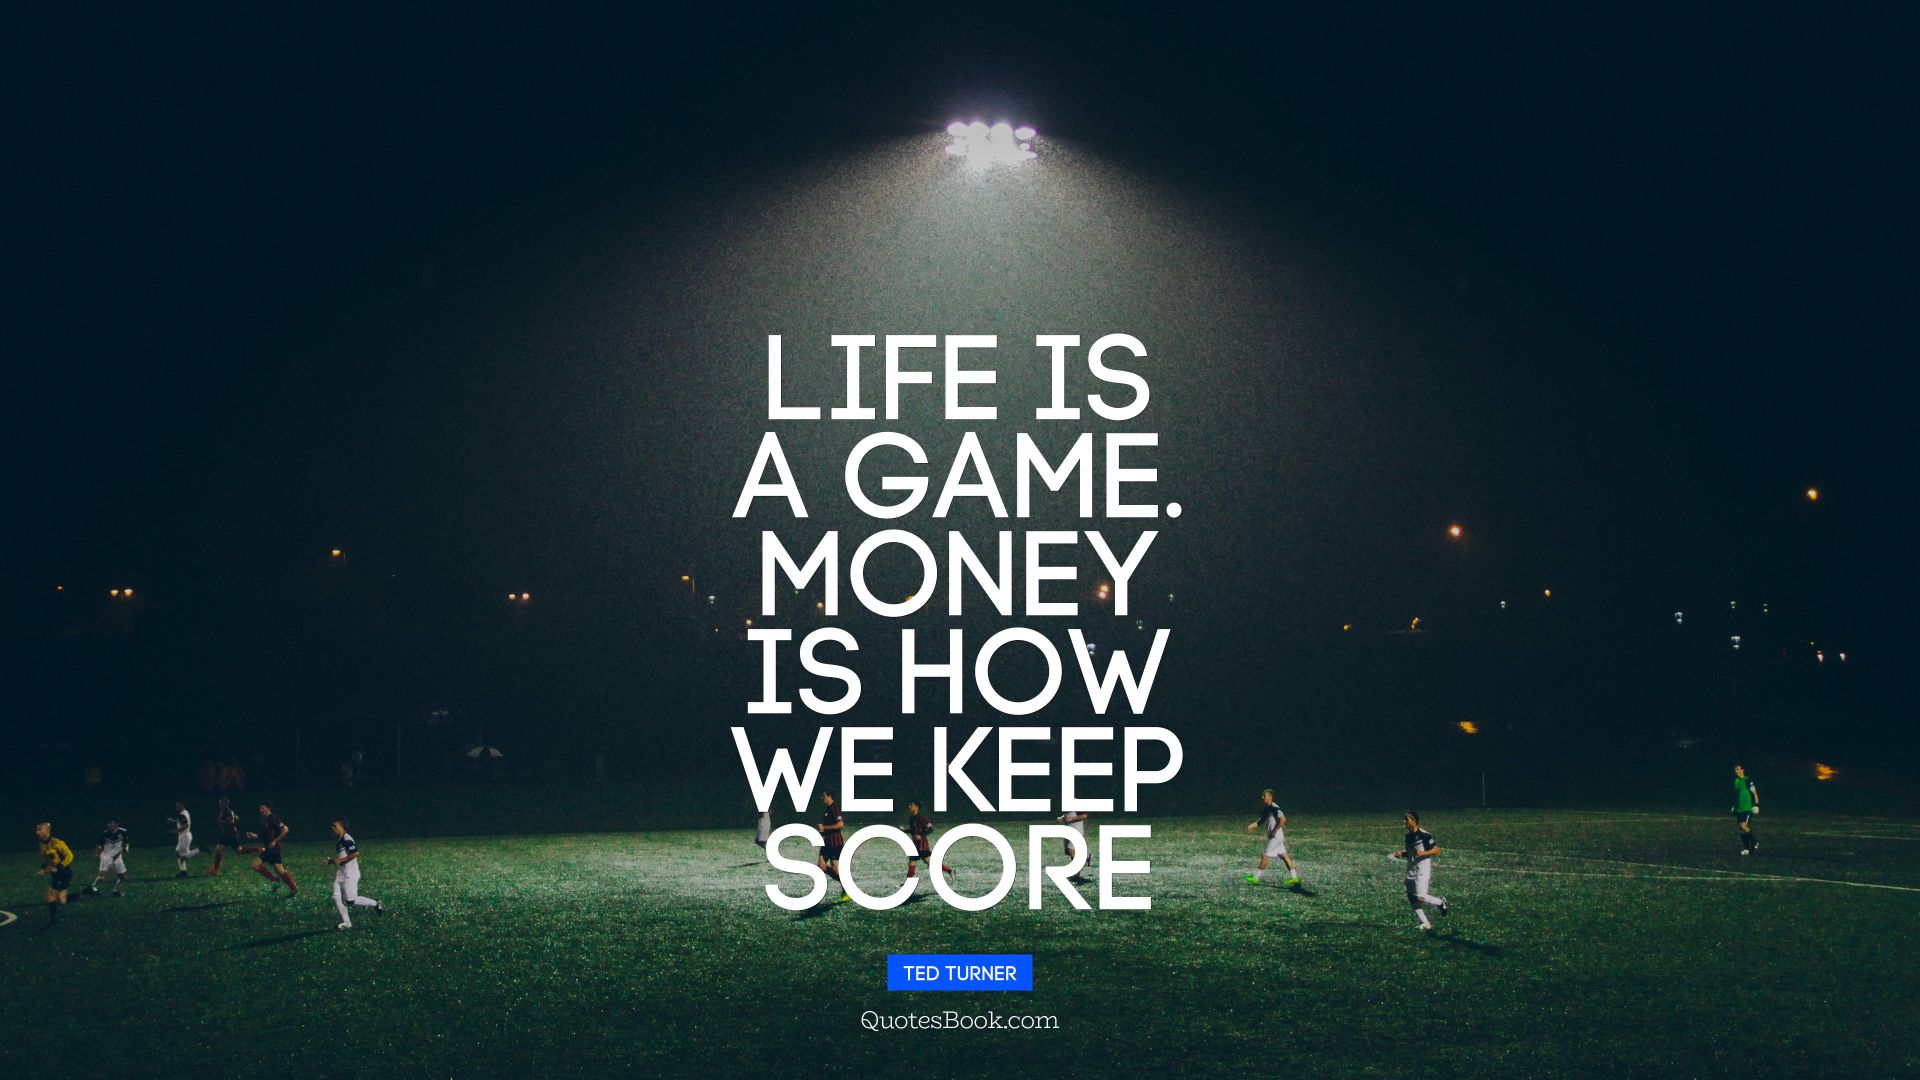 Life is a game. money is how we keep score. - Quote by Ted Turner